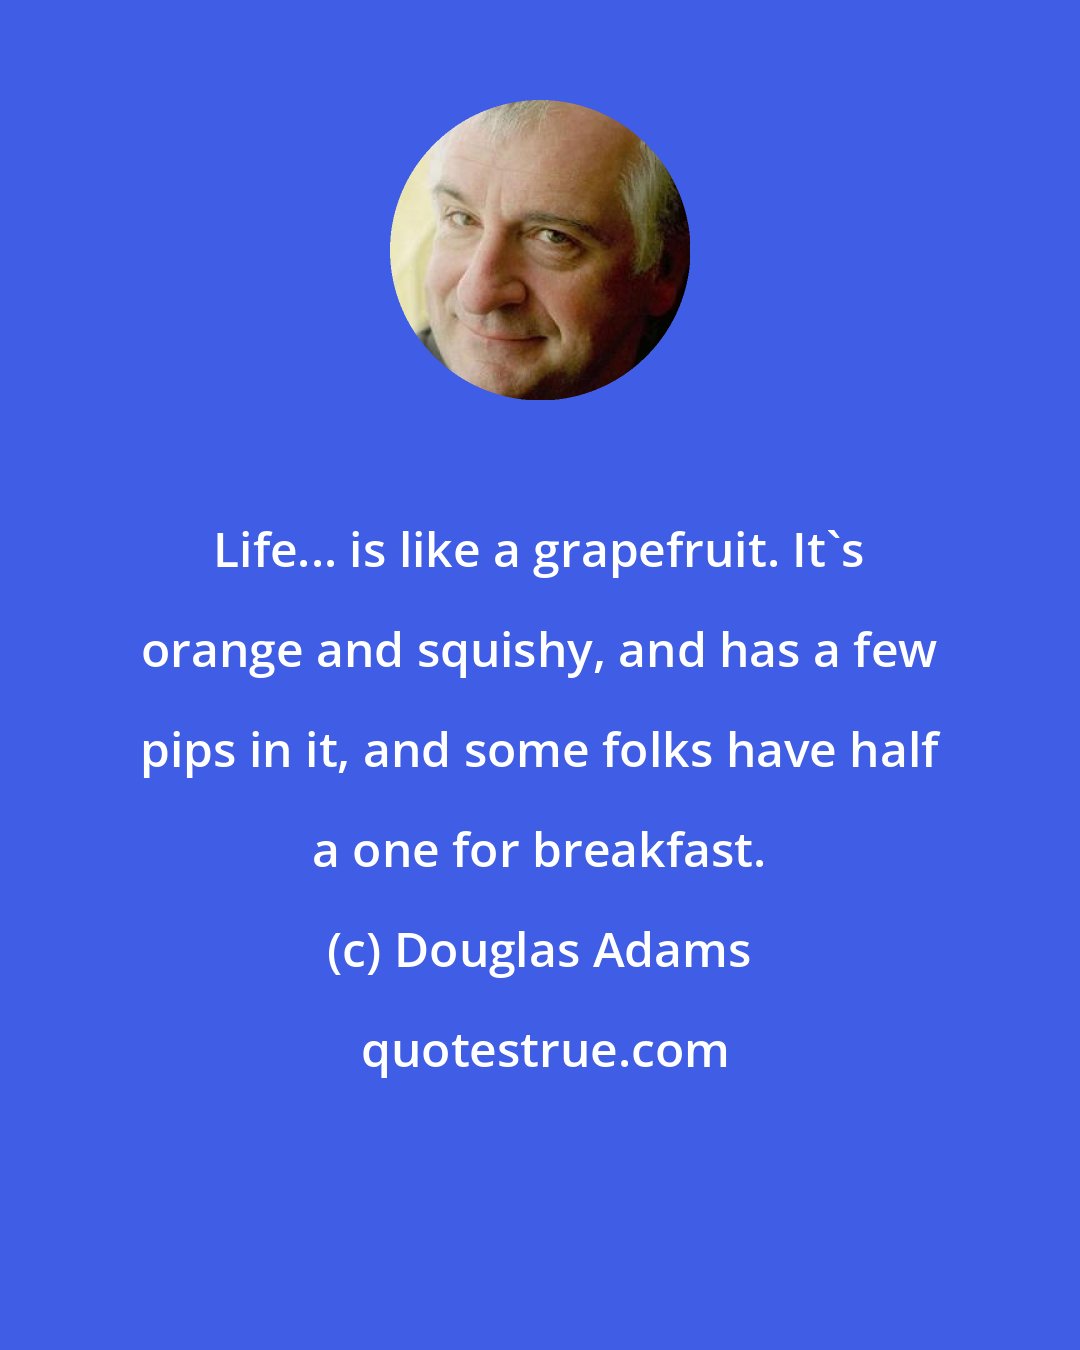 Douglas Adams: Life... is like a grapefruit. It's orange and squishy, and has a few pips in it, and some folks have half a one for breakfast.